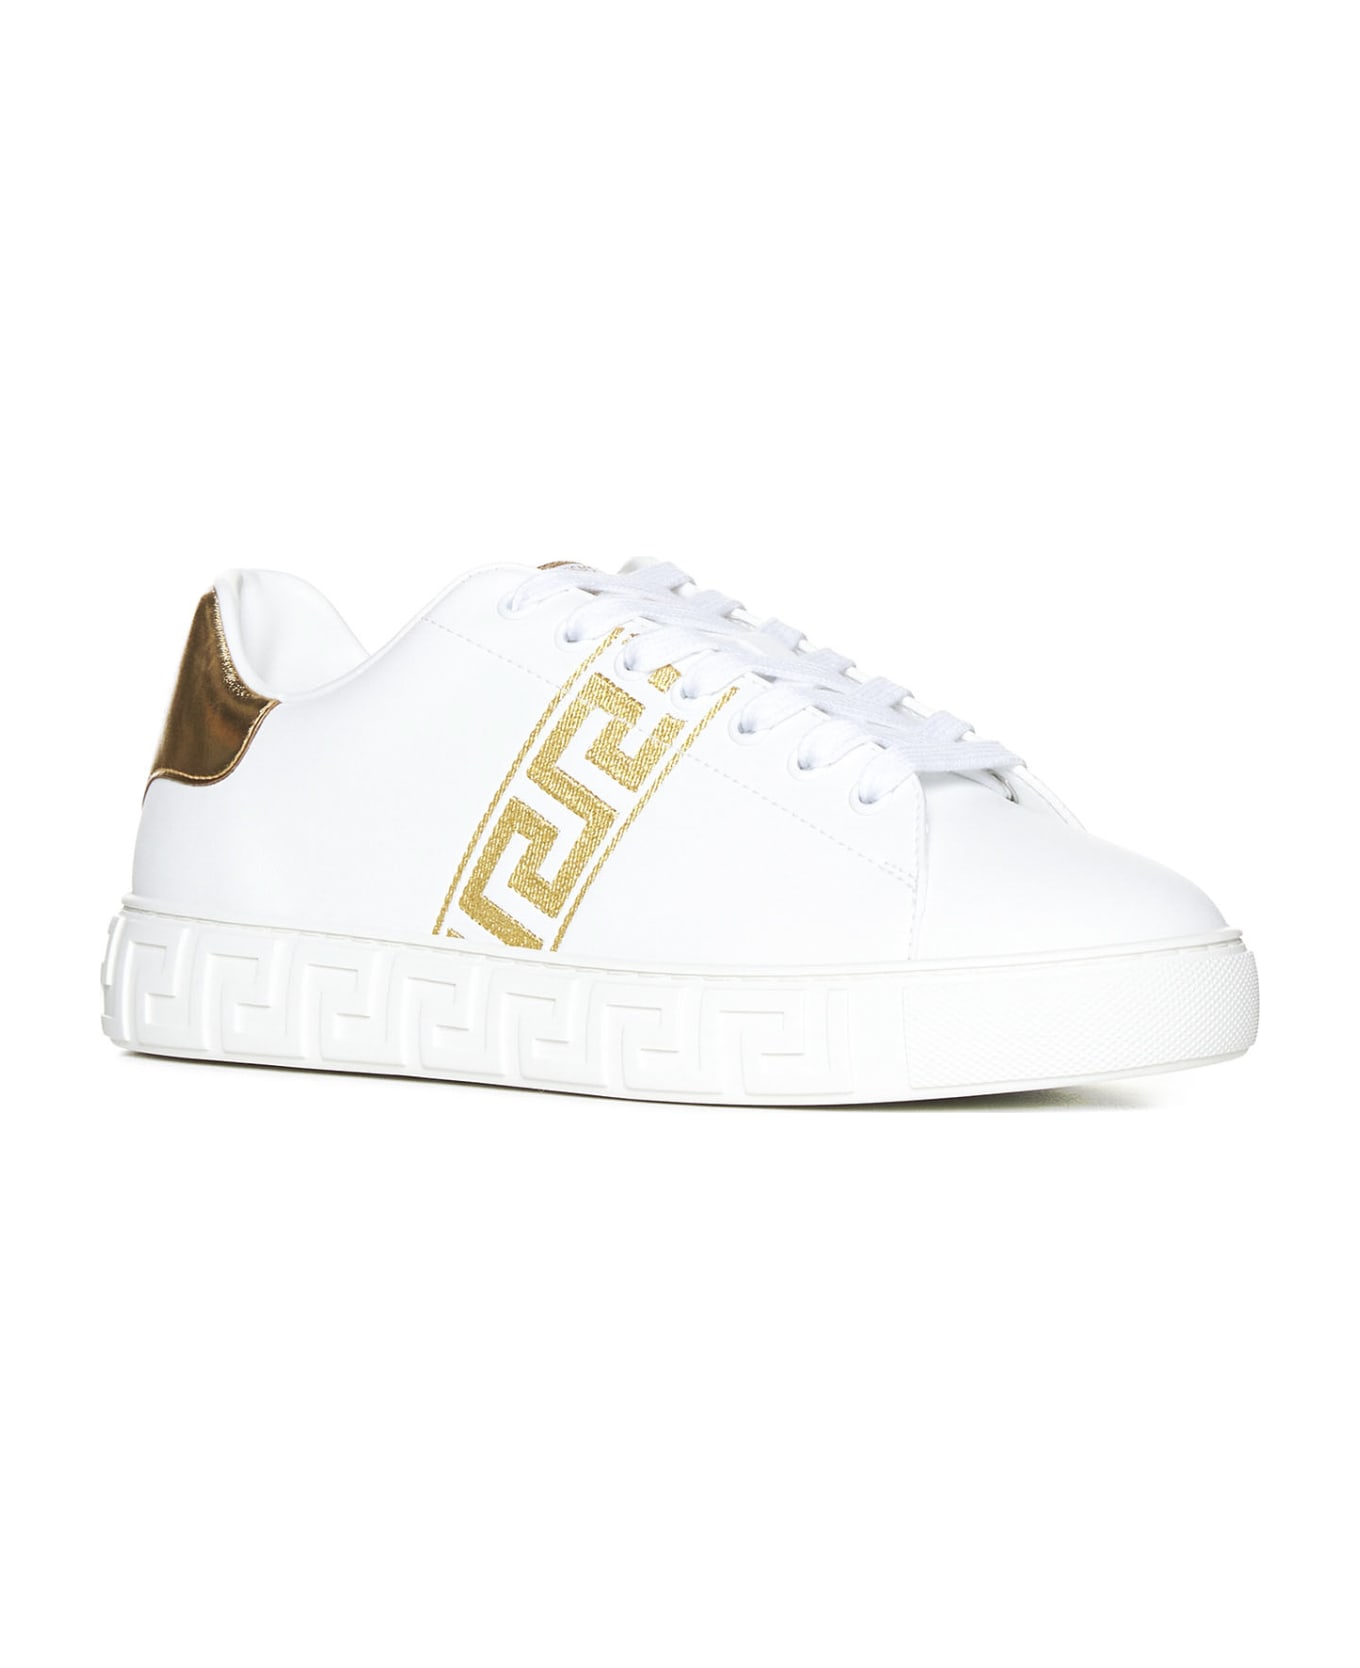 Versace Sneakers - White gold